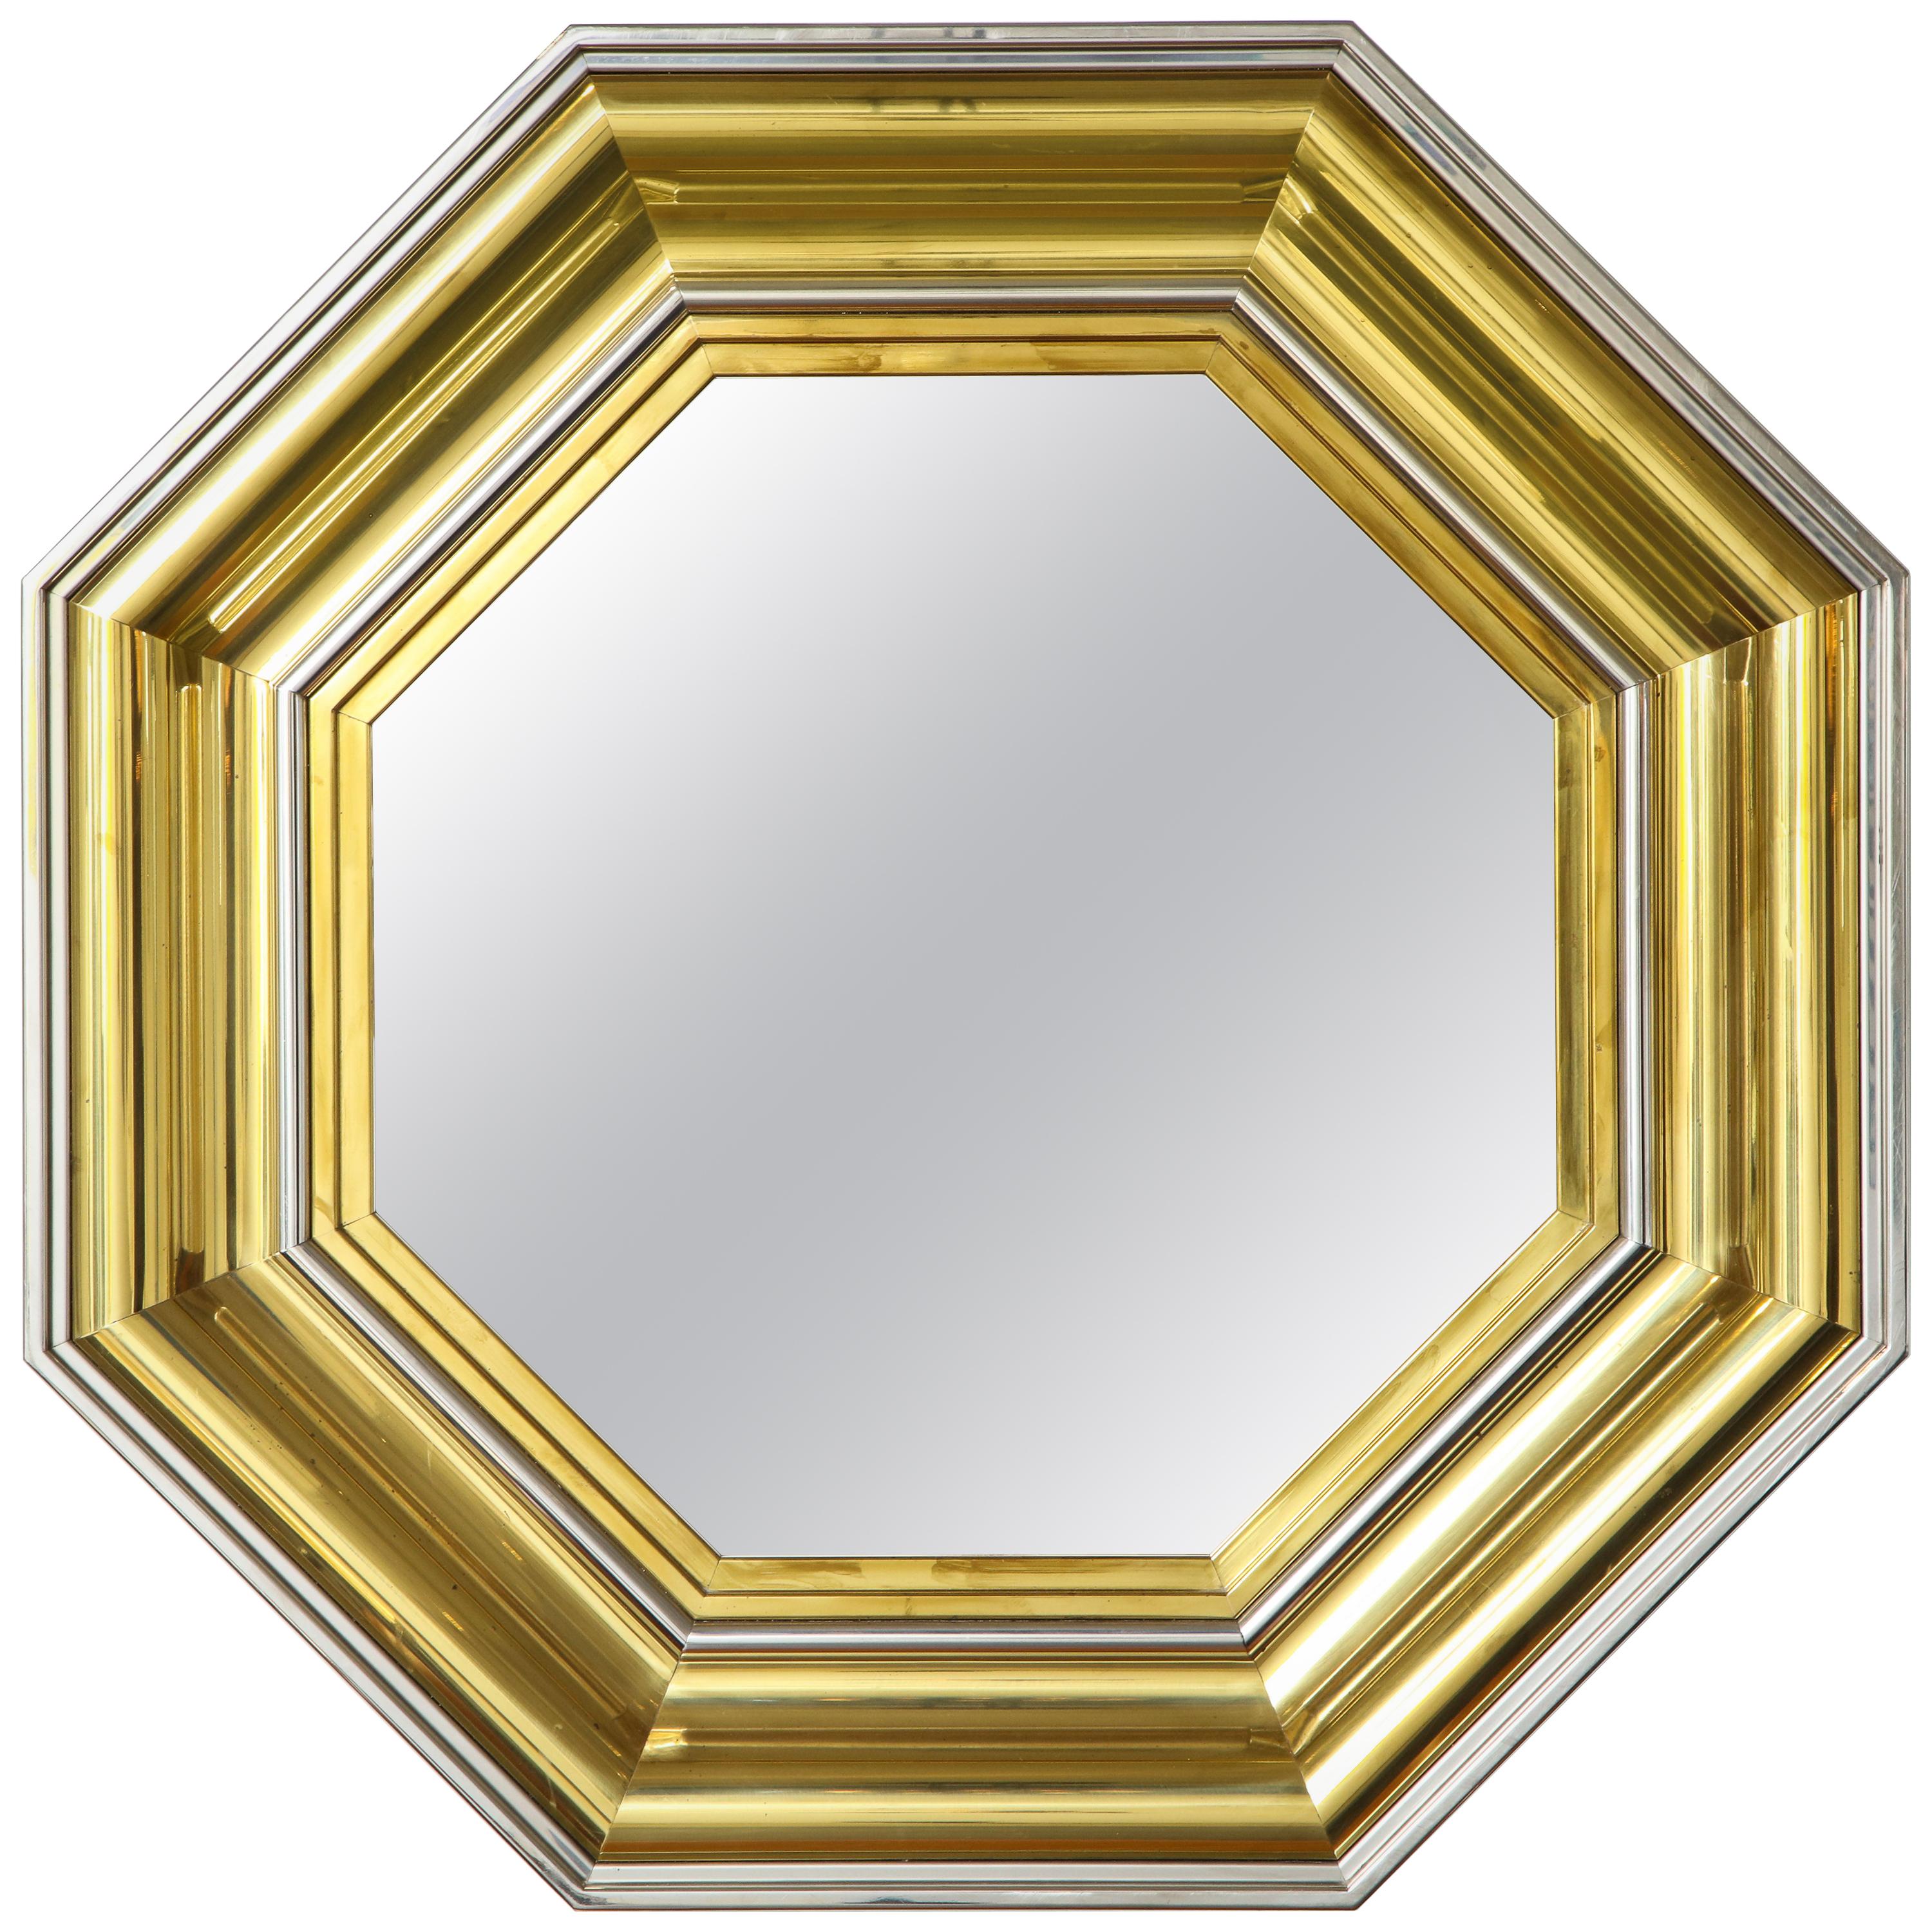 Designed by Sandro Petti for Maison Jansen rare pair of grand scale octagonal brass and chrome mirrors, Production Metallarte, Italy, 1970s. Iconic of the 1970s in their bold grand size and choice of materials, these incredibly striking and chic